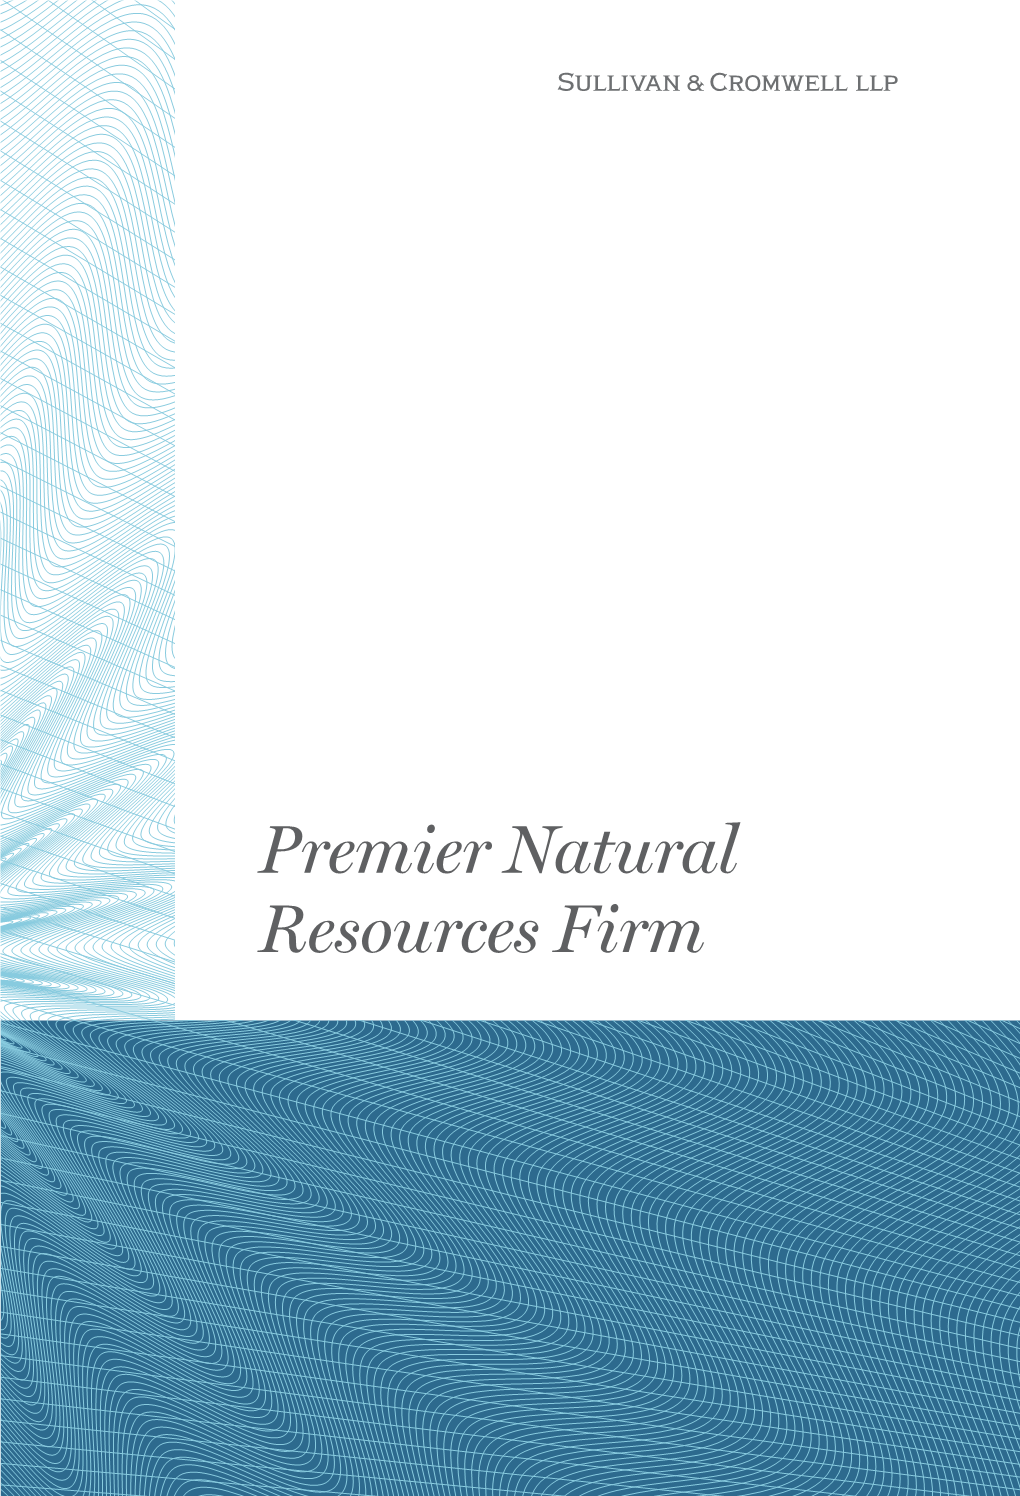 Premier Natural Resources Firm “They Go to Great Lengths to Understand Your Industry, Business and Specific Objectives